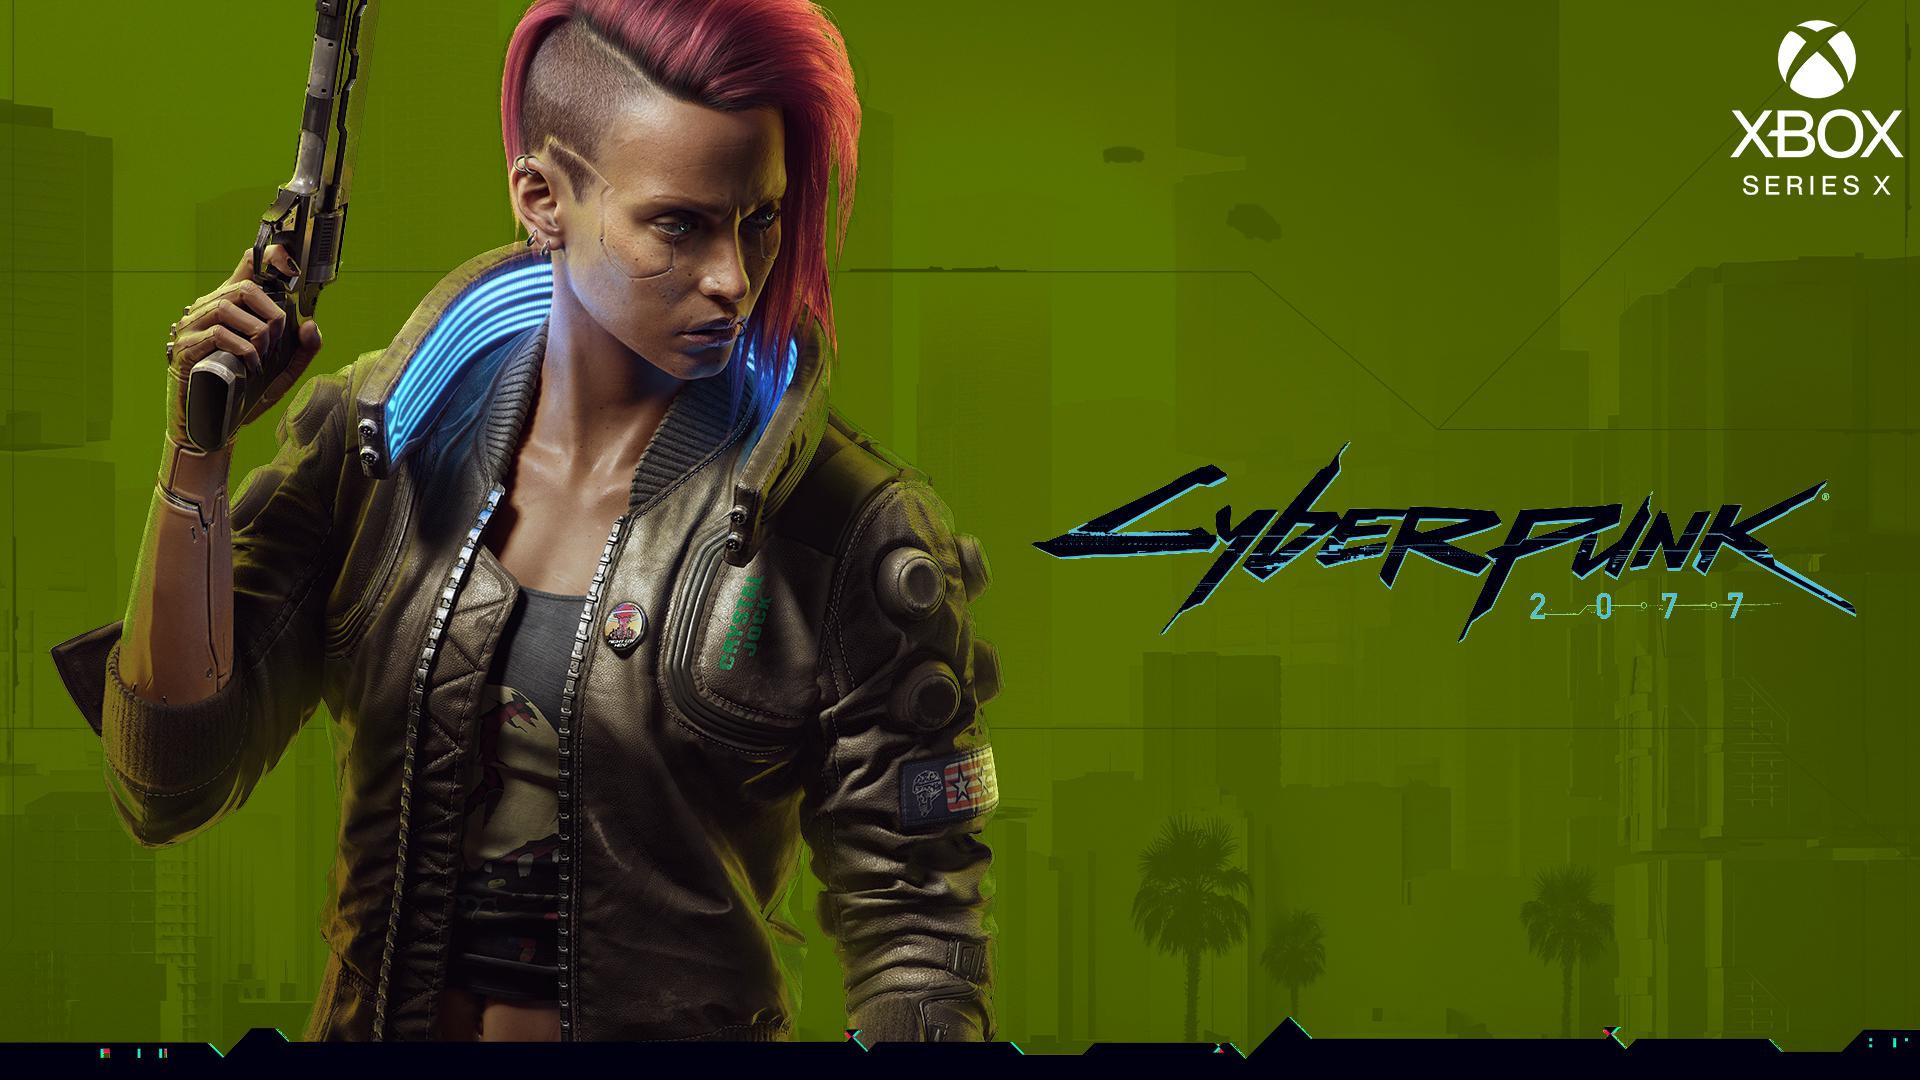 Cyberpunk 2077 Poster with Female V, Xbox Style